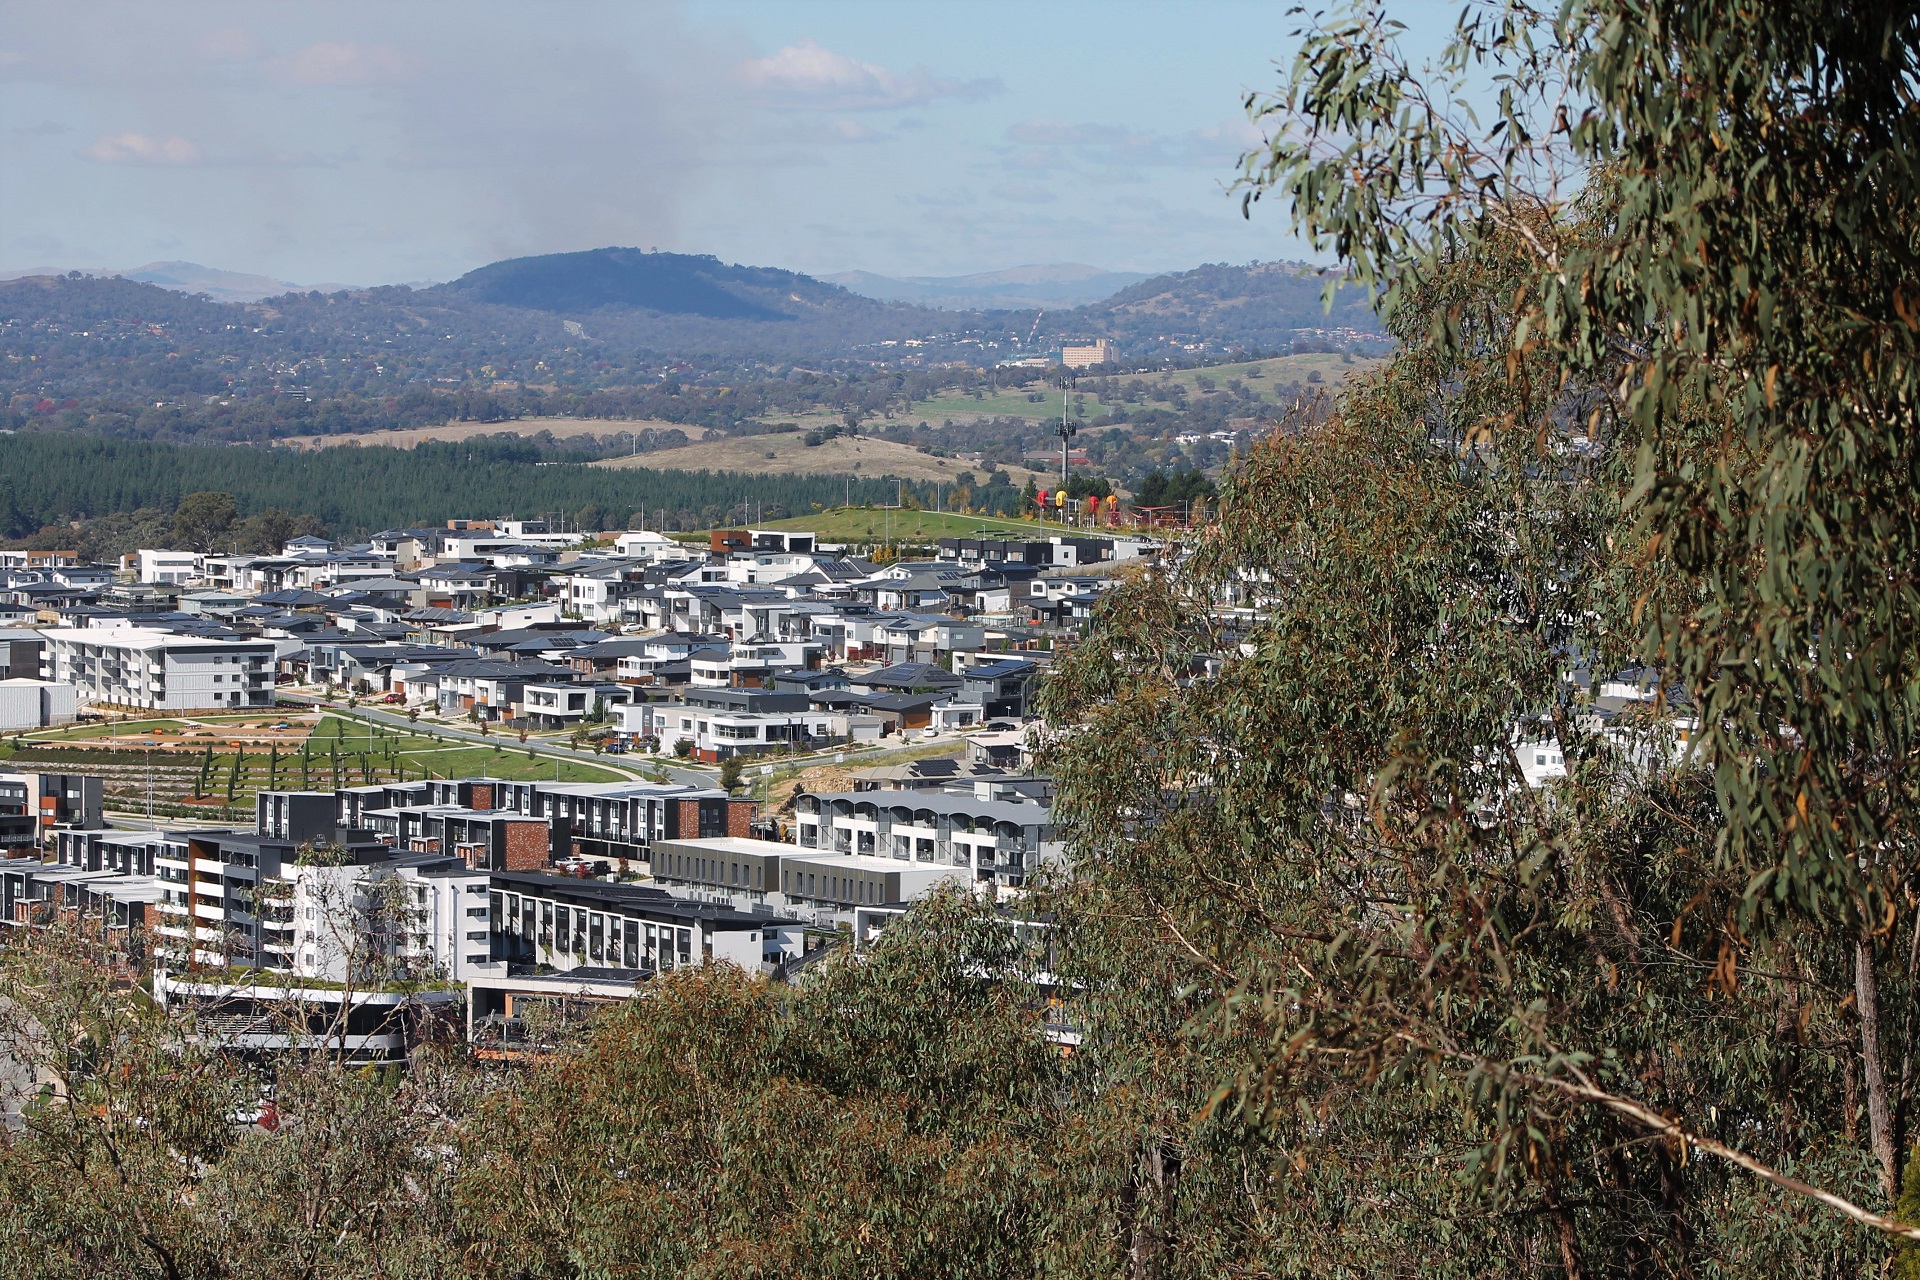 Black and white suburban buildings framed by yellow-green gum trees.